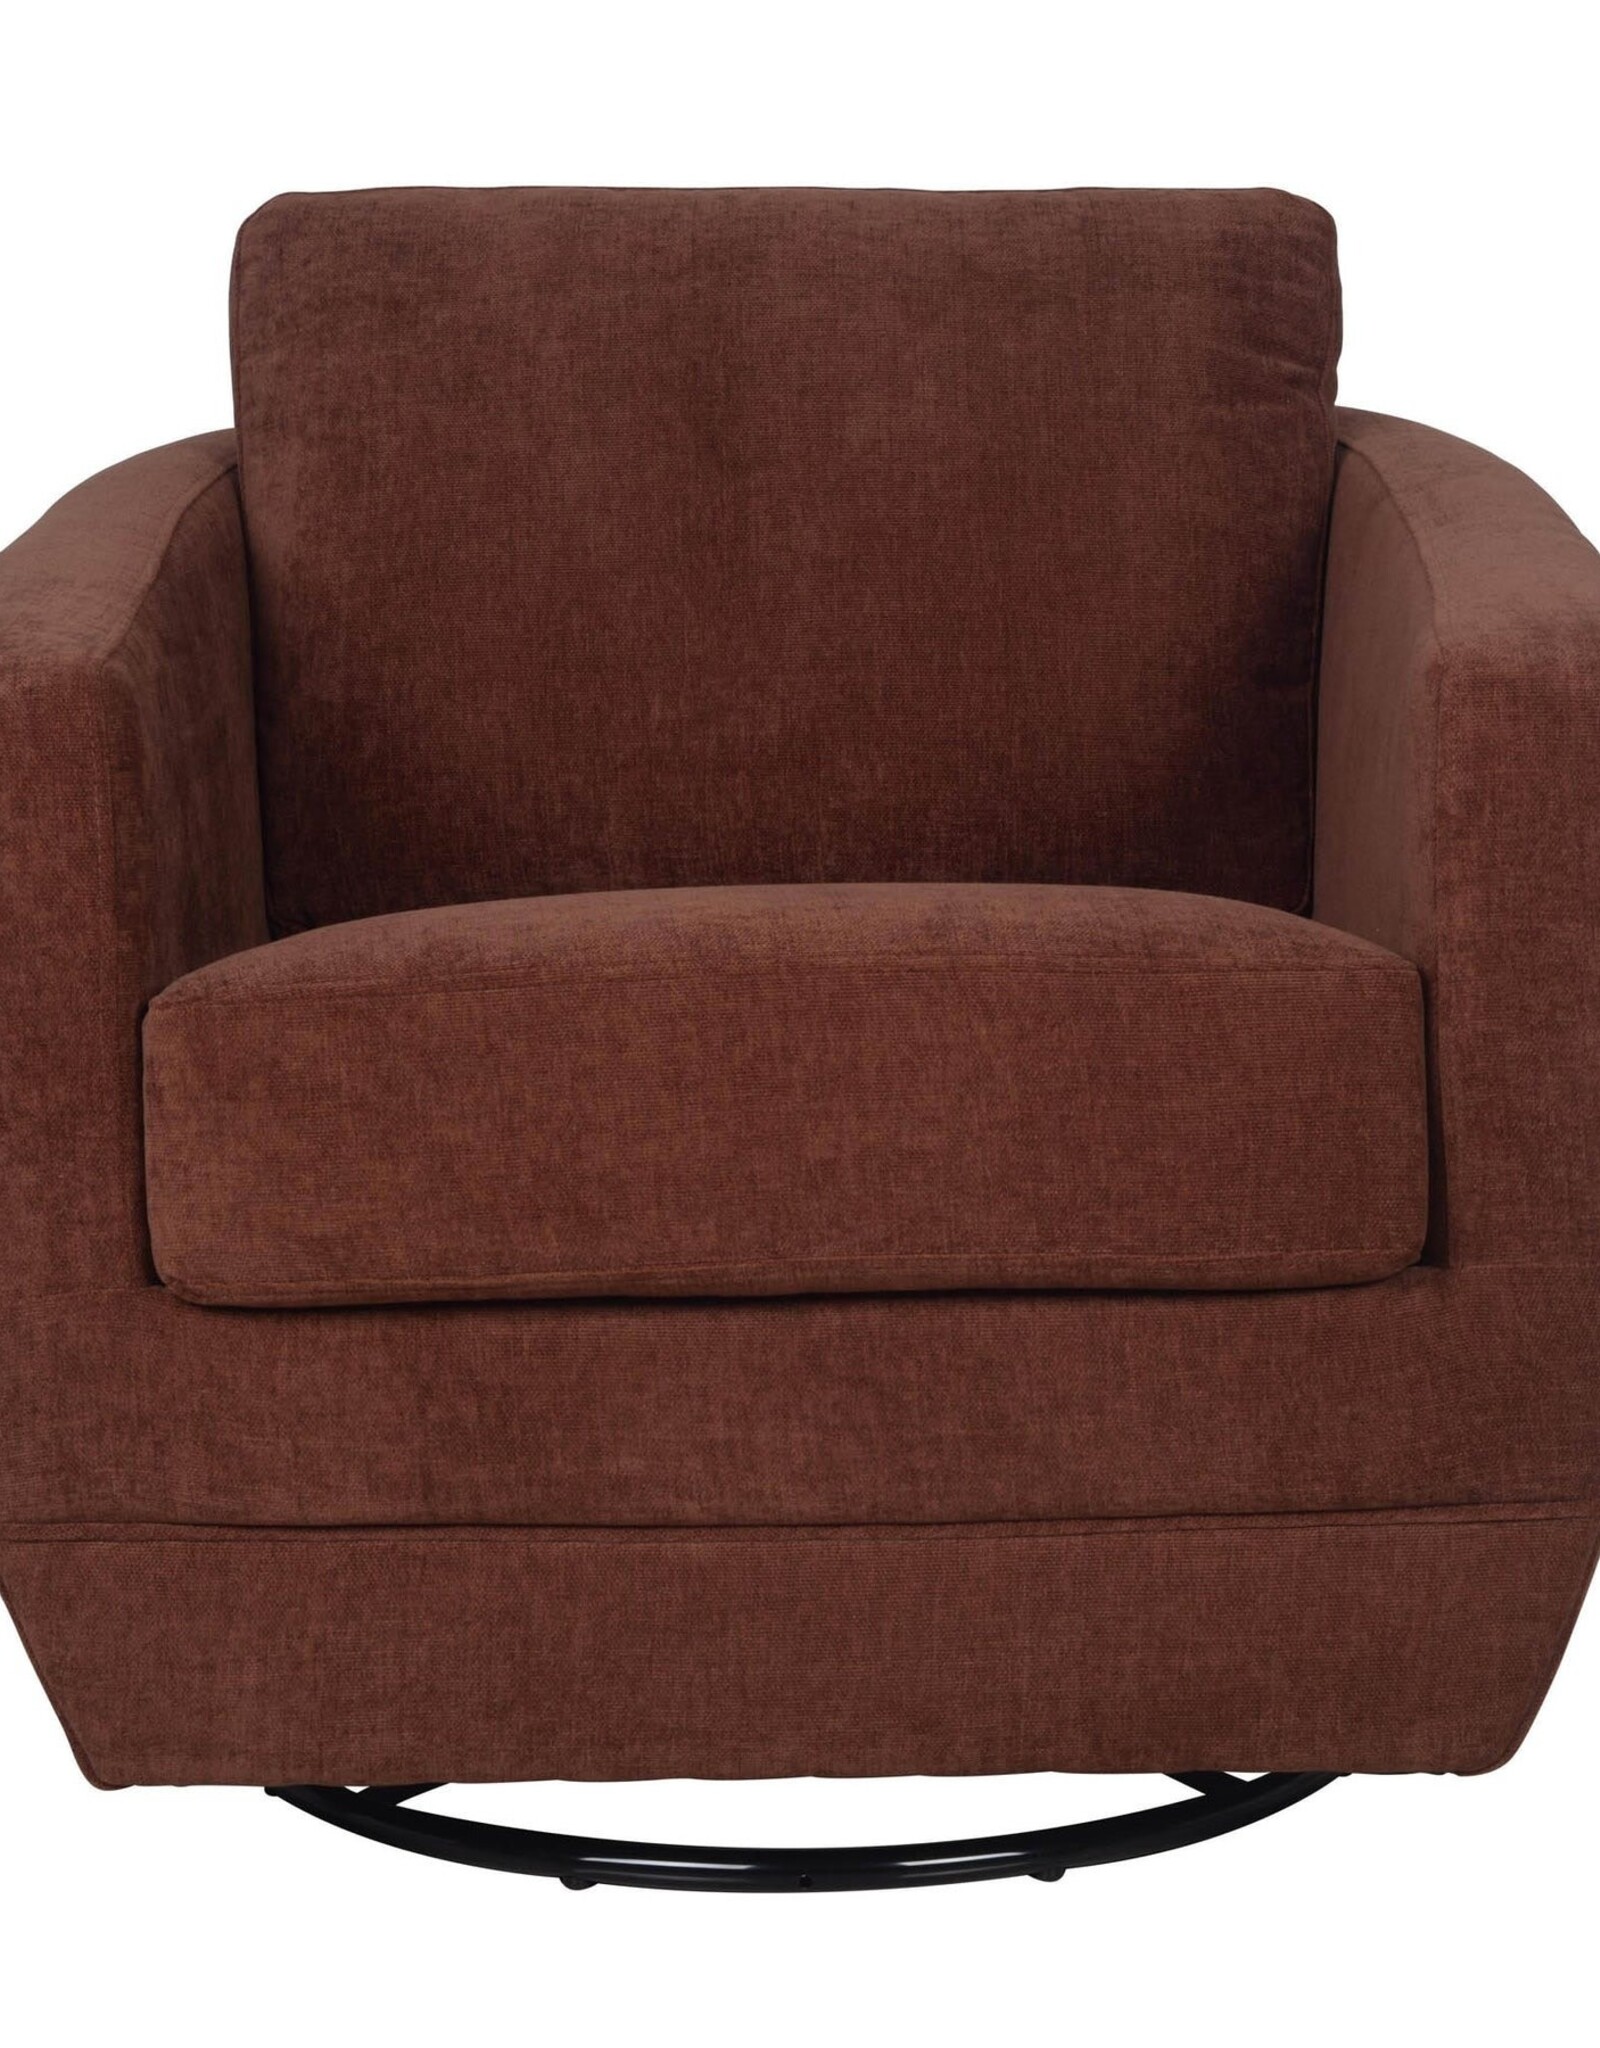 LH Imports Baltimo Swivel Chair